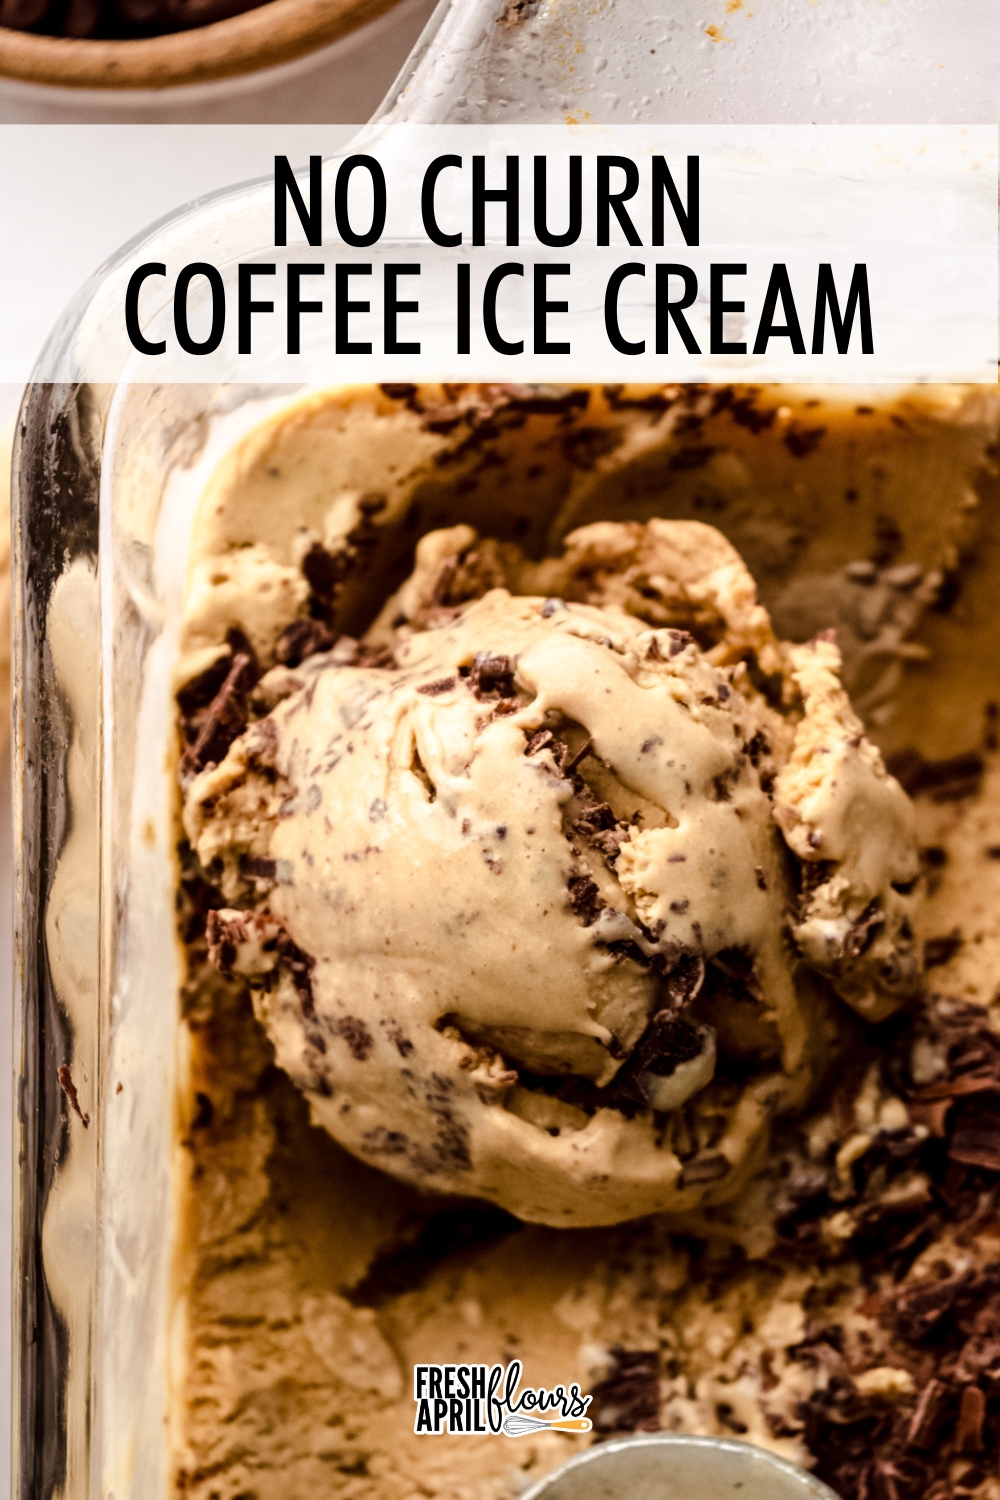 You only need 6 ingredients for this creamy, bold coffee ice cream made with real coffee and chocolate shavings. No ice cream maker needed! via @frshaprilflours